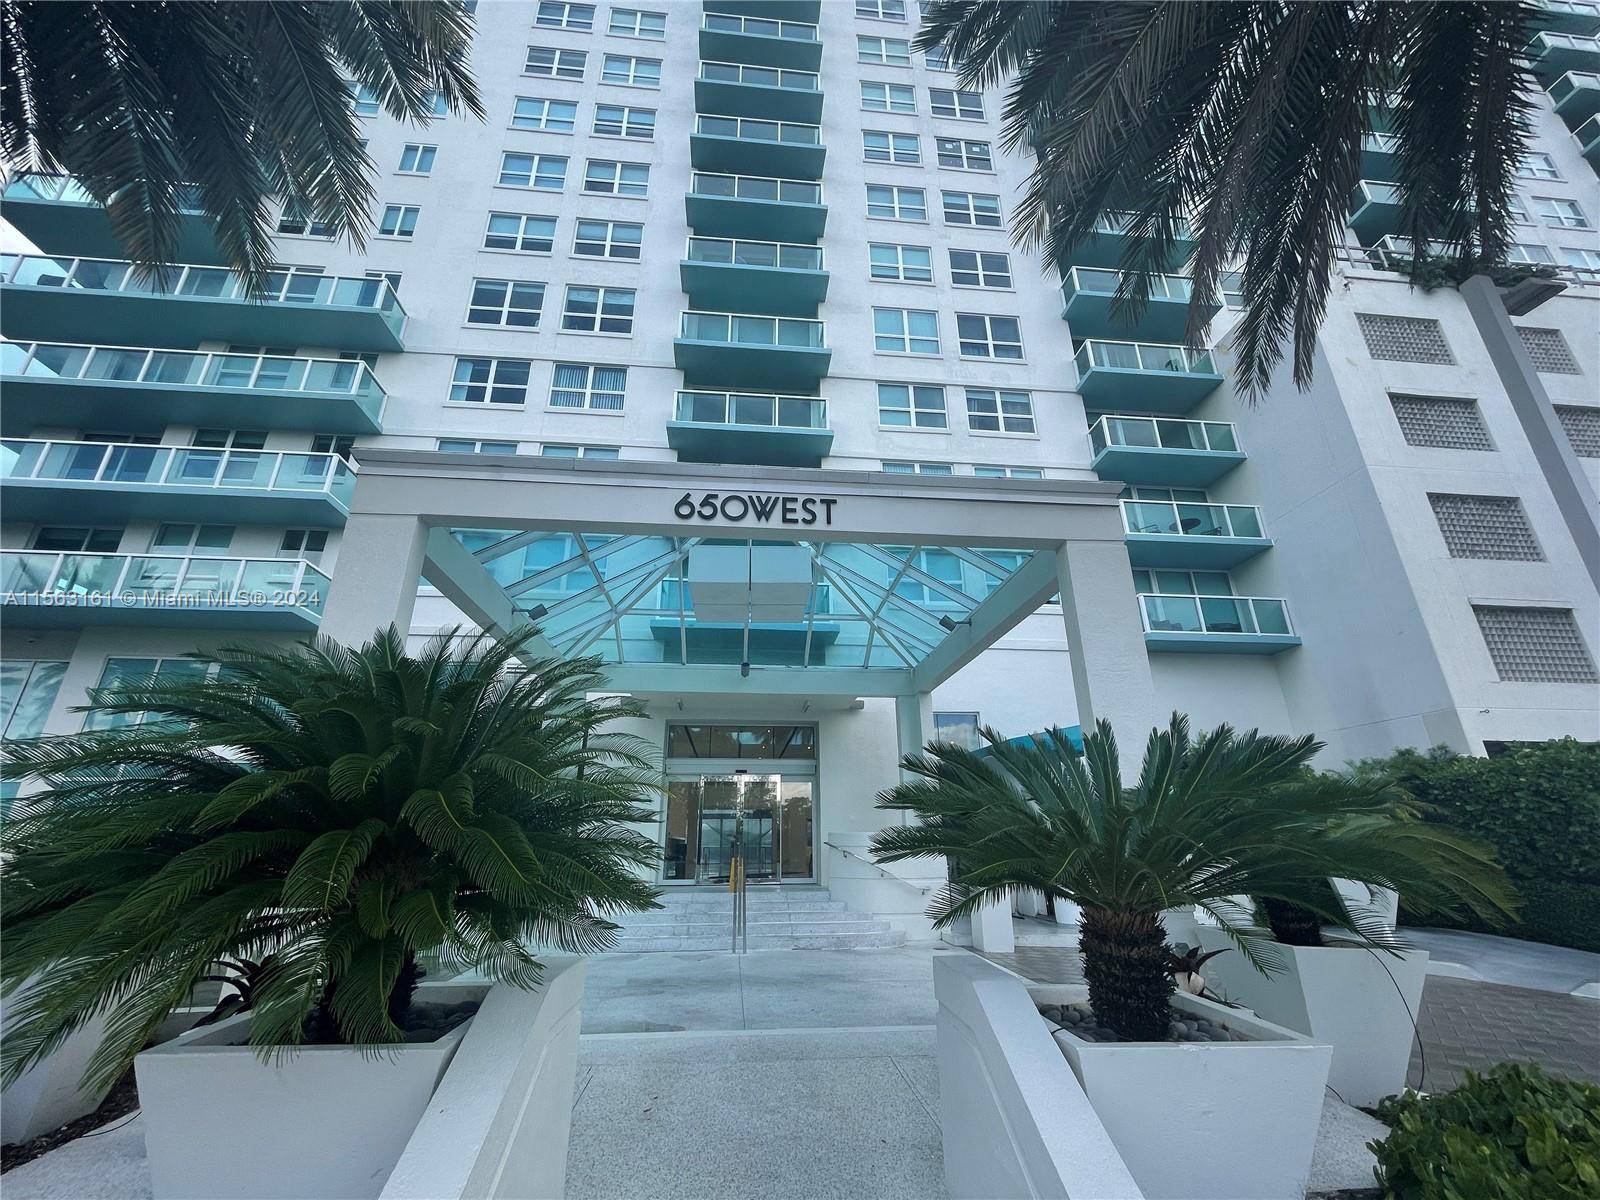 Welcome to enjoy the Floridian lifestyle with the amazing amenities of The Floridian condominium which is located in the heart of South Beach.